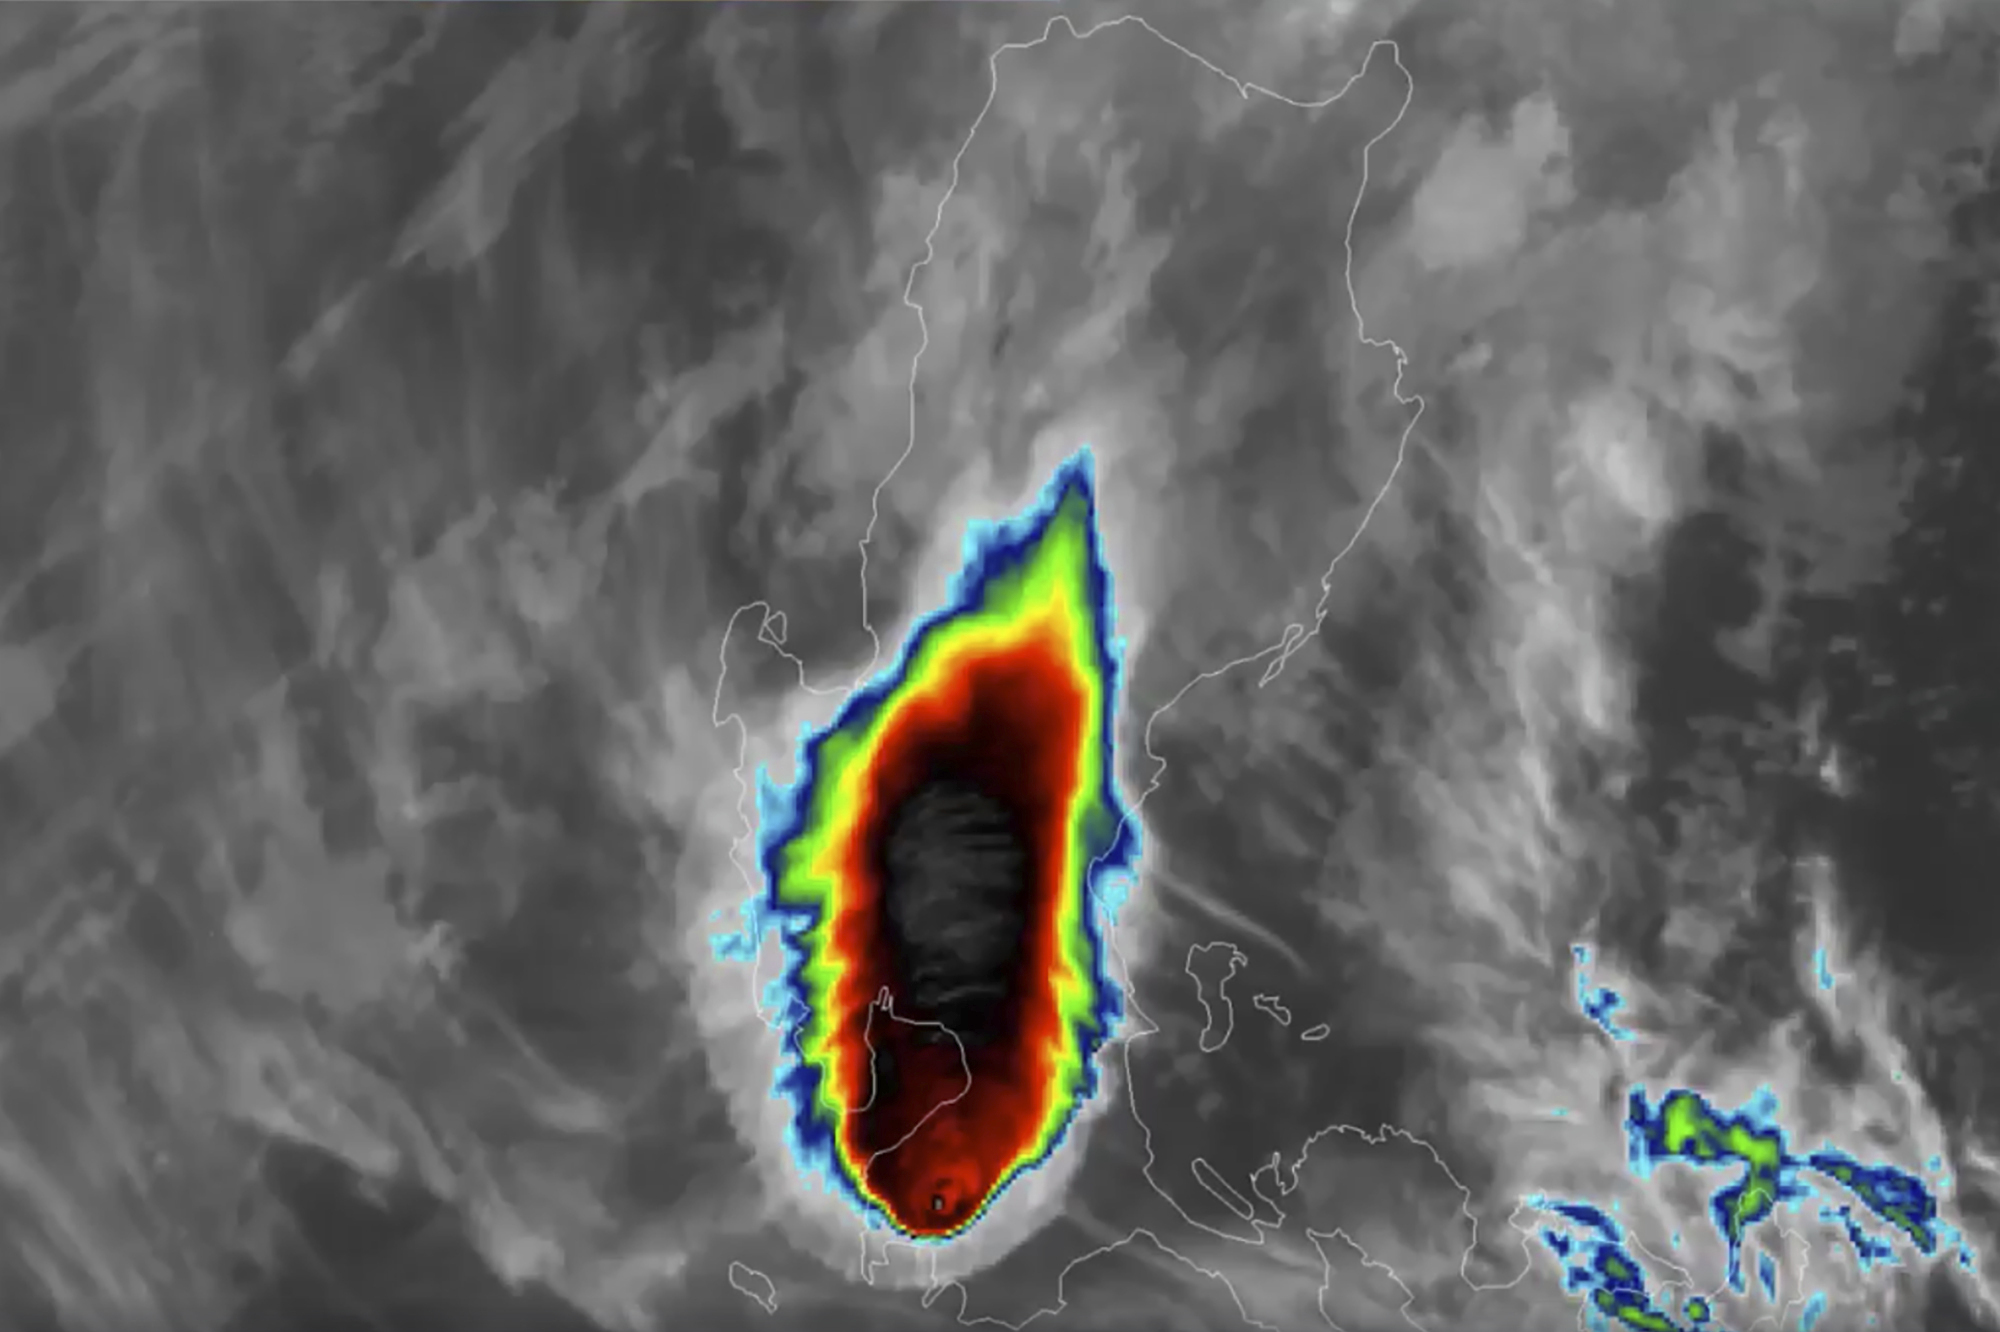 The eruption of Taal volcano, south of Manila, Philippines, in an image made available by Himawari-8 satellite via the National Oceanic and Atmospheric Administration (NOAA) on Jan. 12, 2020. (NOAA/AP)